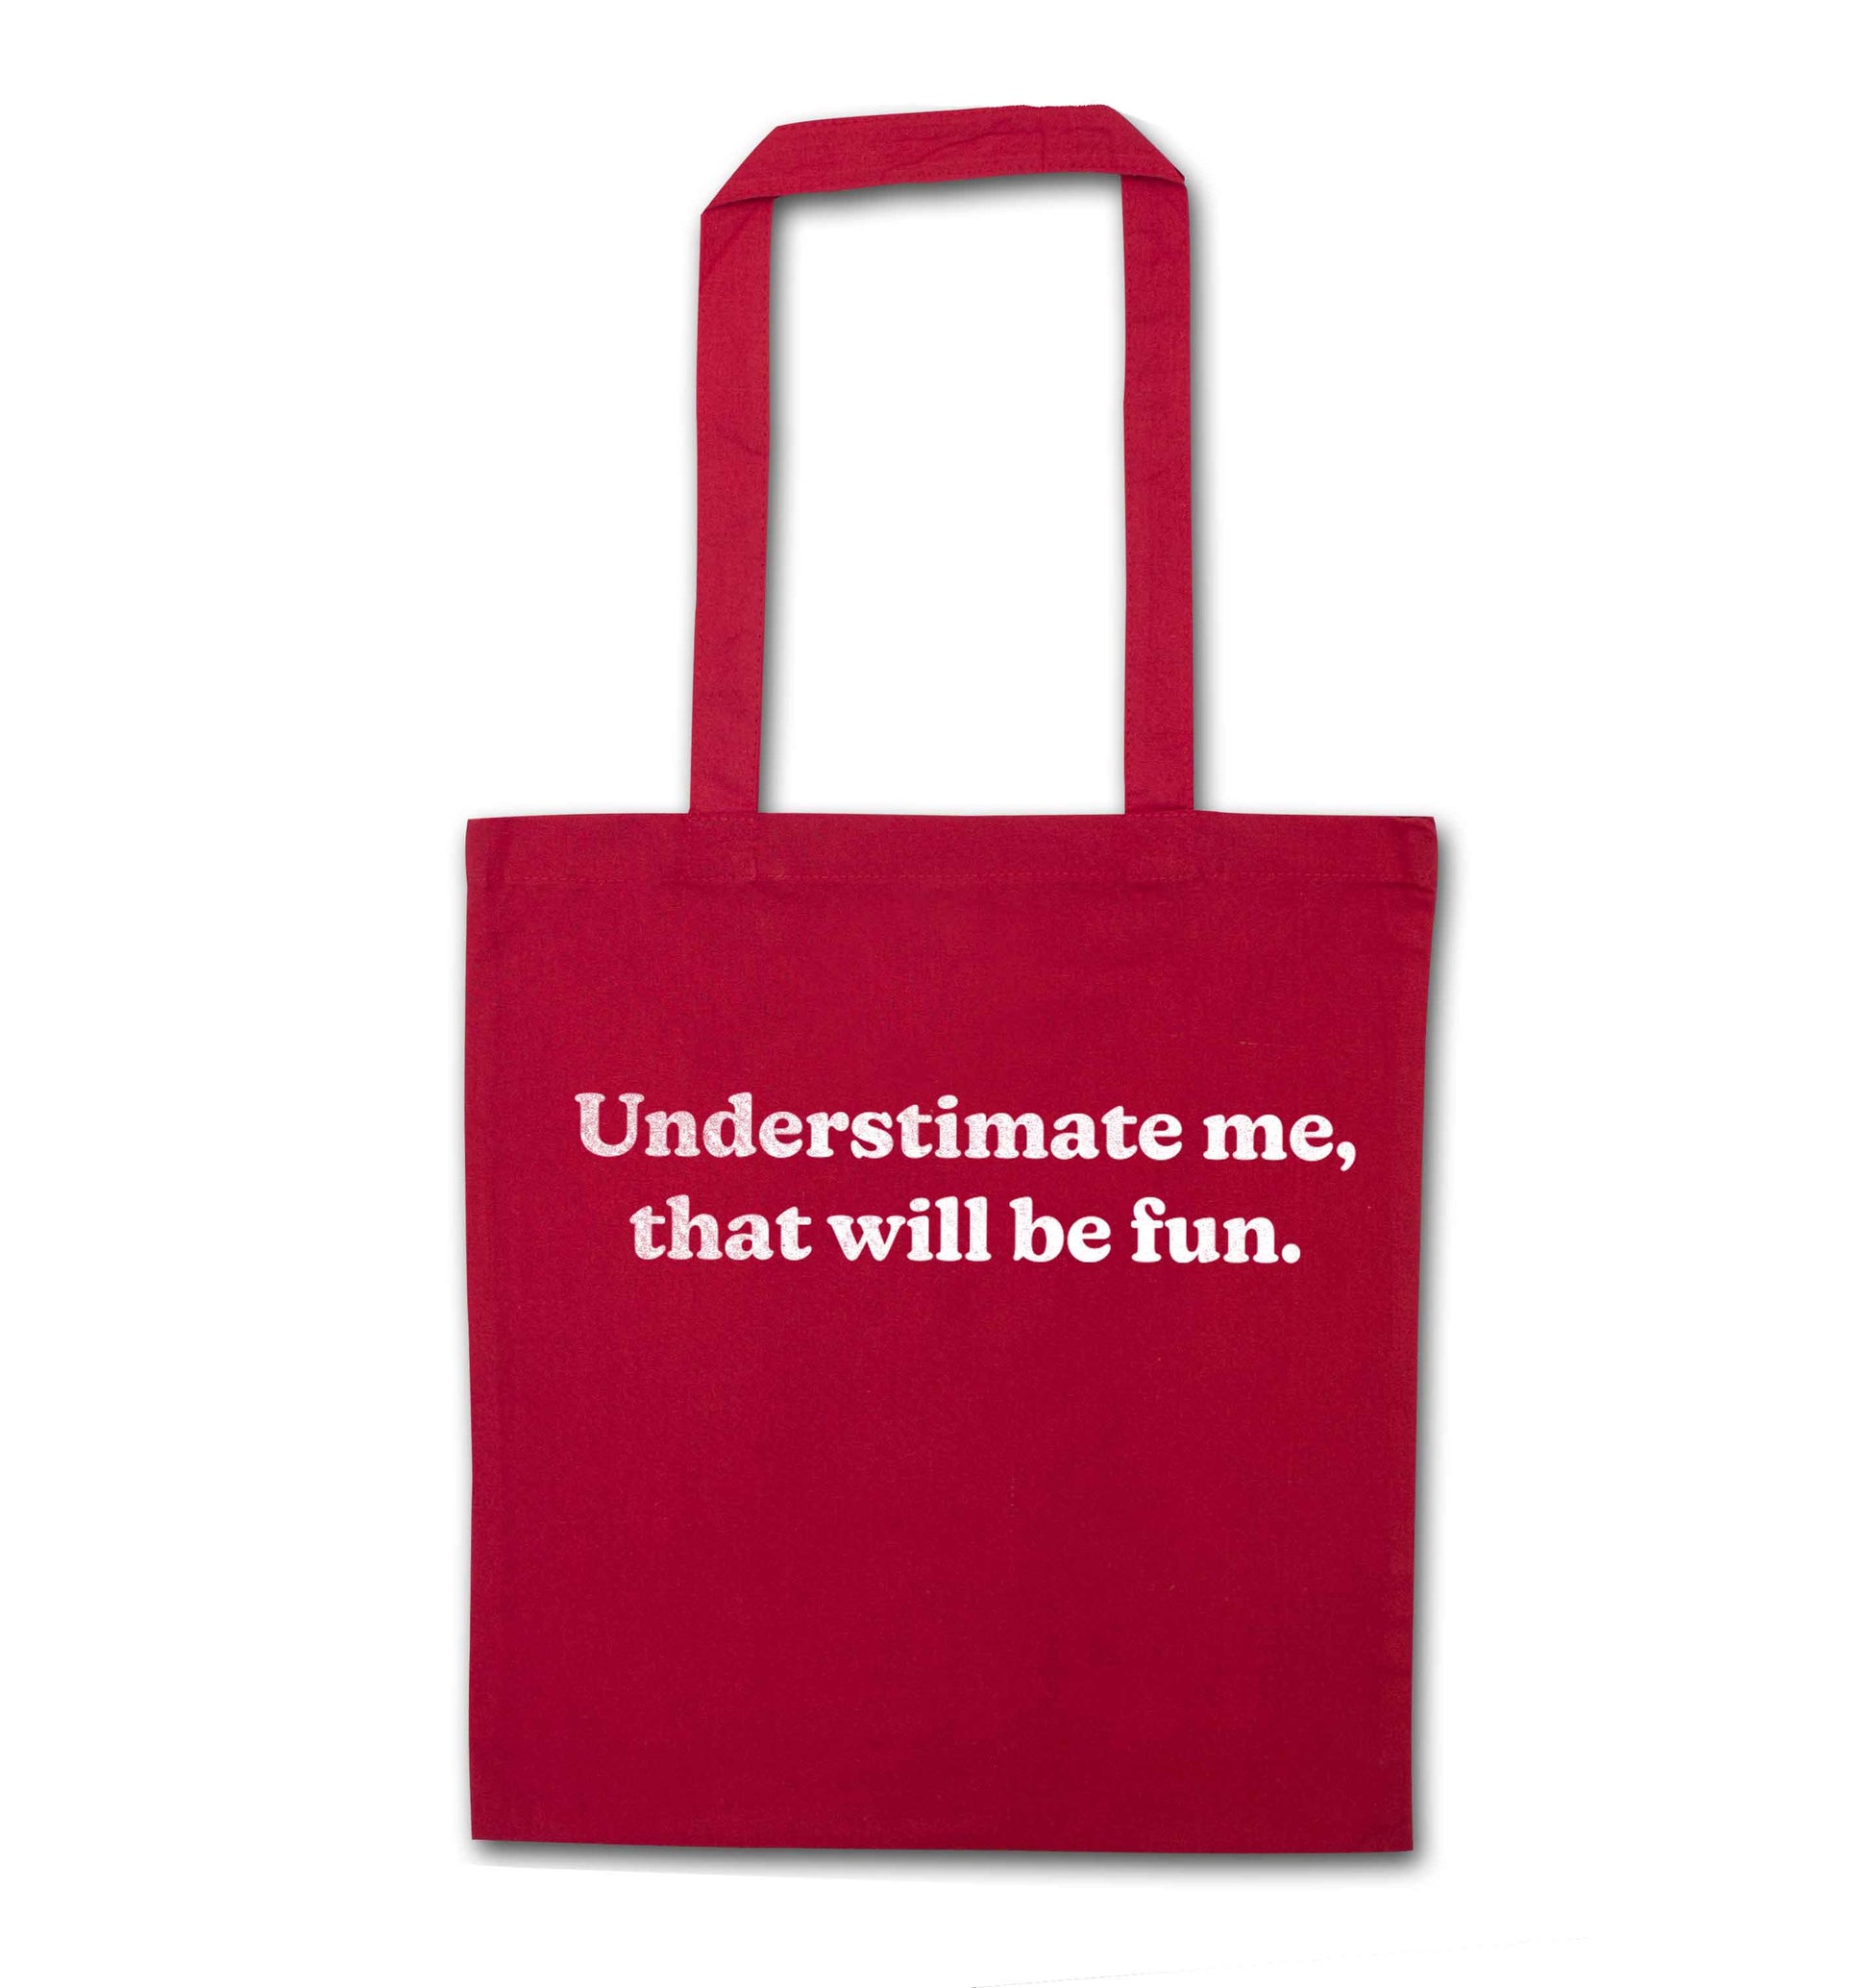 Underestimate me that will be fun red tote bag